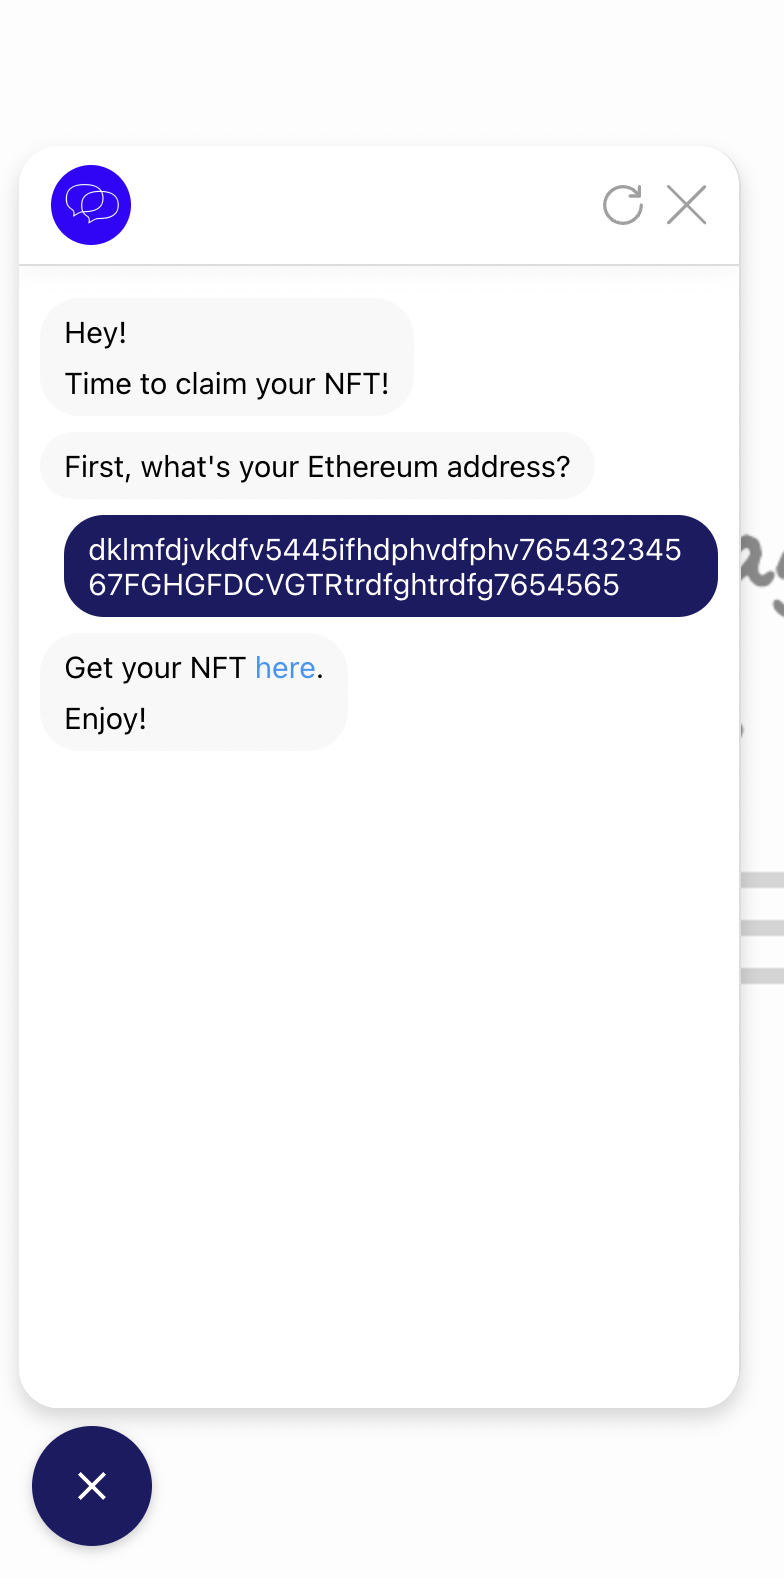 Result when the Ethereum address is NOT in the Airtable